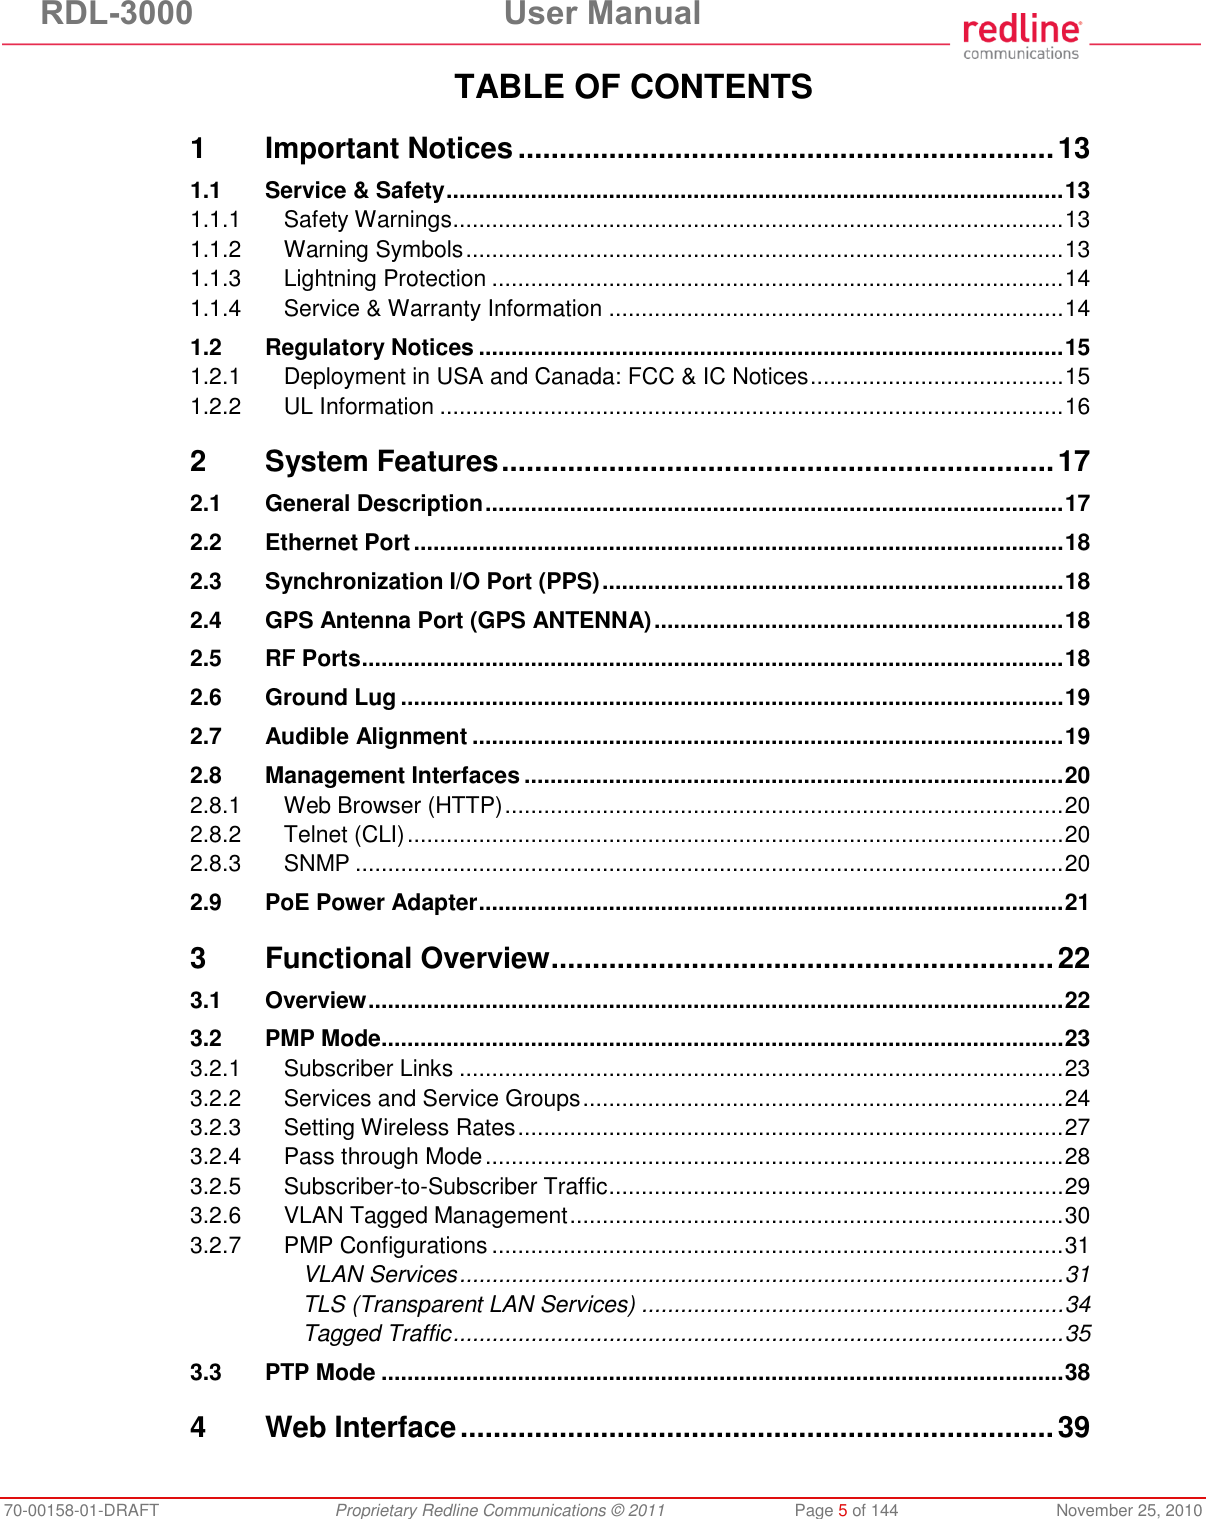 RDL-3000  User Manual 70-00158-01-DRAFT  Proprietary Redline Communications © 2011  Page 5 of 144  November 25, 2010 TABLE OF CONTENTS 1 Important Notices ................................................................. 13 1.1 Service &amp; Safety ............................................................................................... 13 1.1.1 Safety Warnings .............................................................................................. 13 1.1.2 Warning Symbols ............................................................................................ 13 1.1.3 Lightning Protection ........................................................................................ 14 1.1.4 Service &amp; Warranty Information ...................................................................... 14 1.2 Regulatory Notices .......................................................................................... 15 1.2.1 Deployment in USA and Canada: FCC &amp; IC Notices ....................................... 15 1.2.2 UL Information ................................................................................................ 16 2 System Features ................................................................... 17 2.1 General Description ......................................................................................... 17 2.2 Ethernet Port .................................................................................................... 18 2.3 Synchronization I/O Port (PPS) ....................................................................... 18 2.4 GPS Antenna Port (GPS ANTENNA) ............................................................... 18 2.5 RF Ports ............................................................................................................ 18 2.6 Ground Lug ...................................................................................................... 19 2.7 Audible Alignment ........................................................................................... 19 2.8 Management Interfaces ................................................................................... 20 2.8.1 Web Browser (HTTP) ...................................................................................... 20 2.8.2 Telnet (CLI) ..................................................................................................... 20 2.8.3 SNMP ............................................................................................................. 20 2.9 PoE Power Adapter .......................................................................................... 21 3 Functional Overview ............................................................. 22 3.1 Overview ........................................................................................................... 22 3.2 PMP Mode ......................................................................................................... 23 3.2.1 Subscriber Links ............................................................................................. 23 3.2.2 Services and Service Groups .......................................................................... 24 3.2.3 Setting Wireless Rates .................................................................................... 27 3.2.4 Pass through Mode ......................................................................................... 28 3.2.5 Subscriber-to-Subscriber Traffic ...................................................................... 29 3.2.6 VLAN Tagged Management ............................................................................ 30 3.2.7 PMP Configurations ........................................................................................ 31 VLAN Services ............................................................................................. 31 TLS (Transparent LAN Services) ................................................................. 34 Tagged Traffic .............................................................................................. 35 3.3 PTP Mode ......................................................................................................... 38 4 Web Interface ........................................................................ 39 